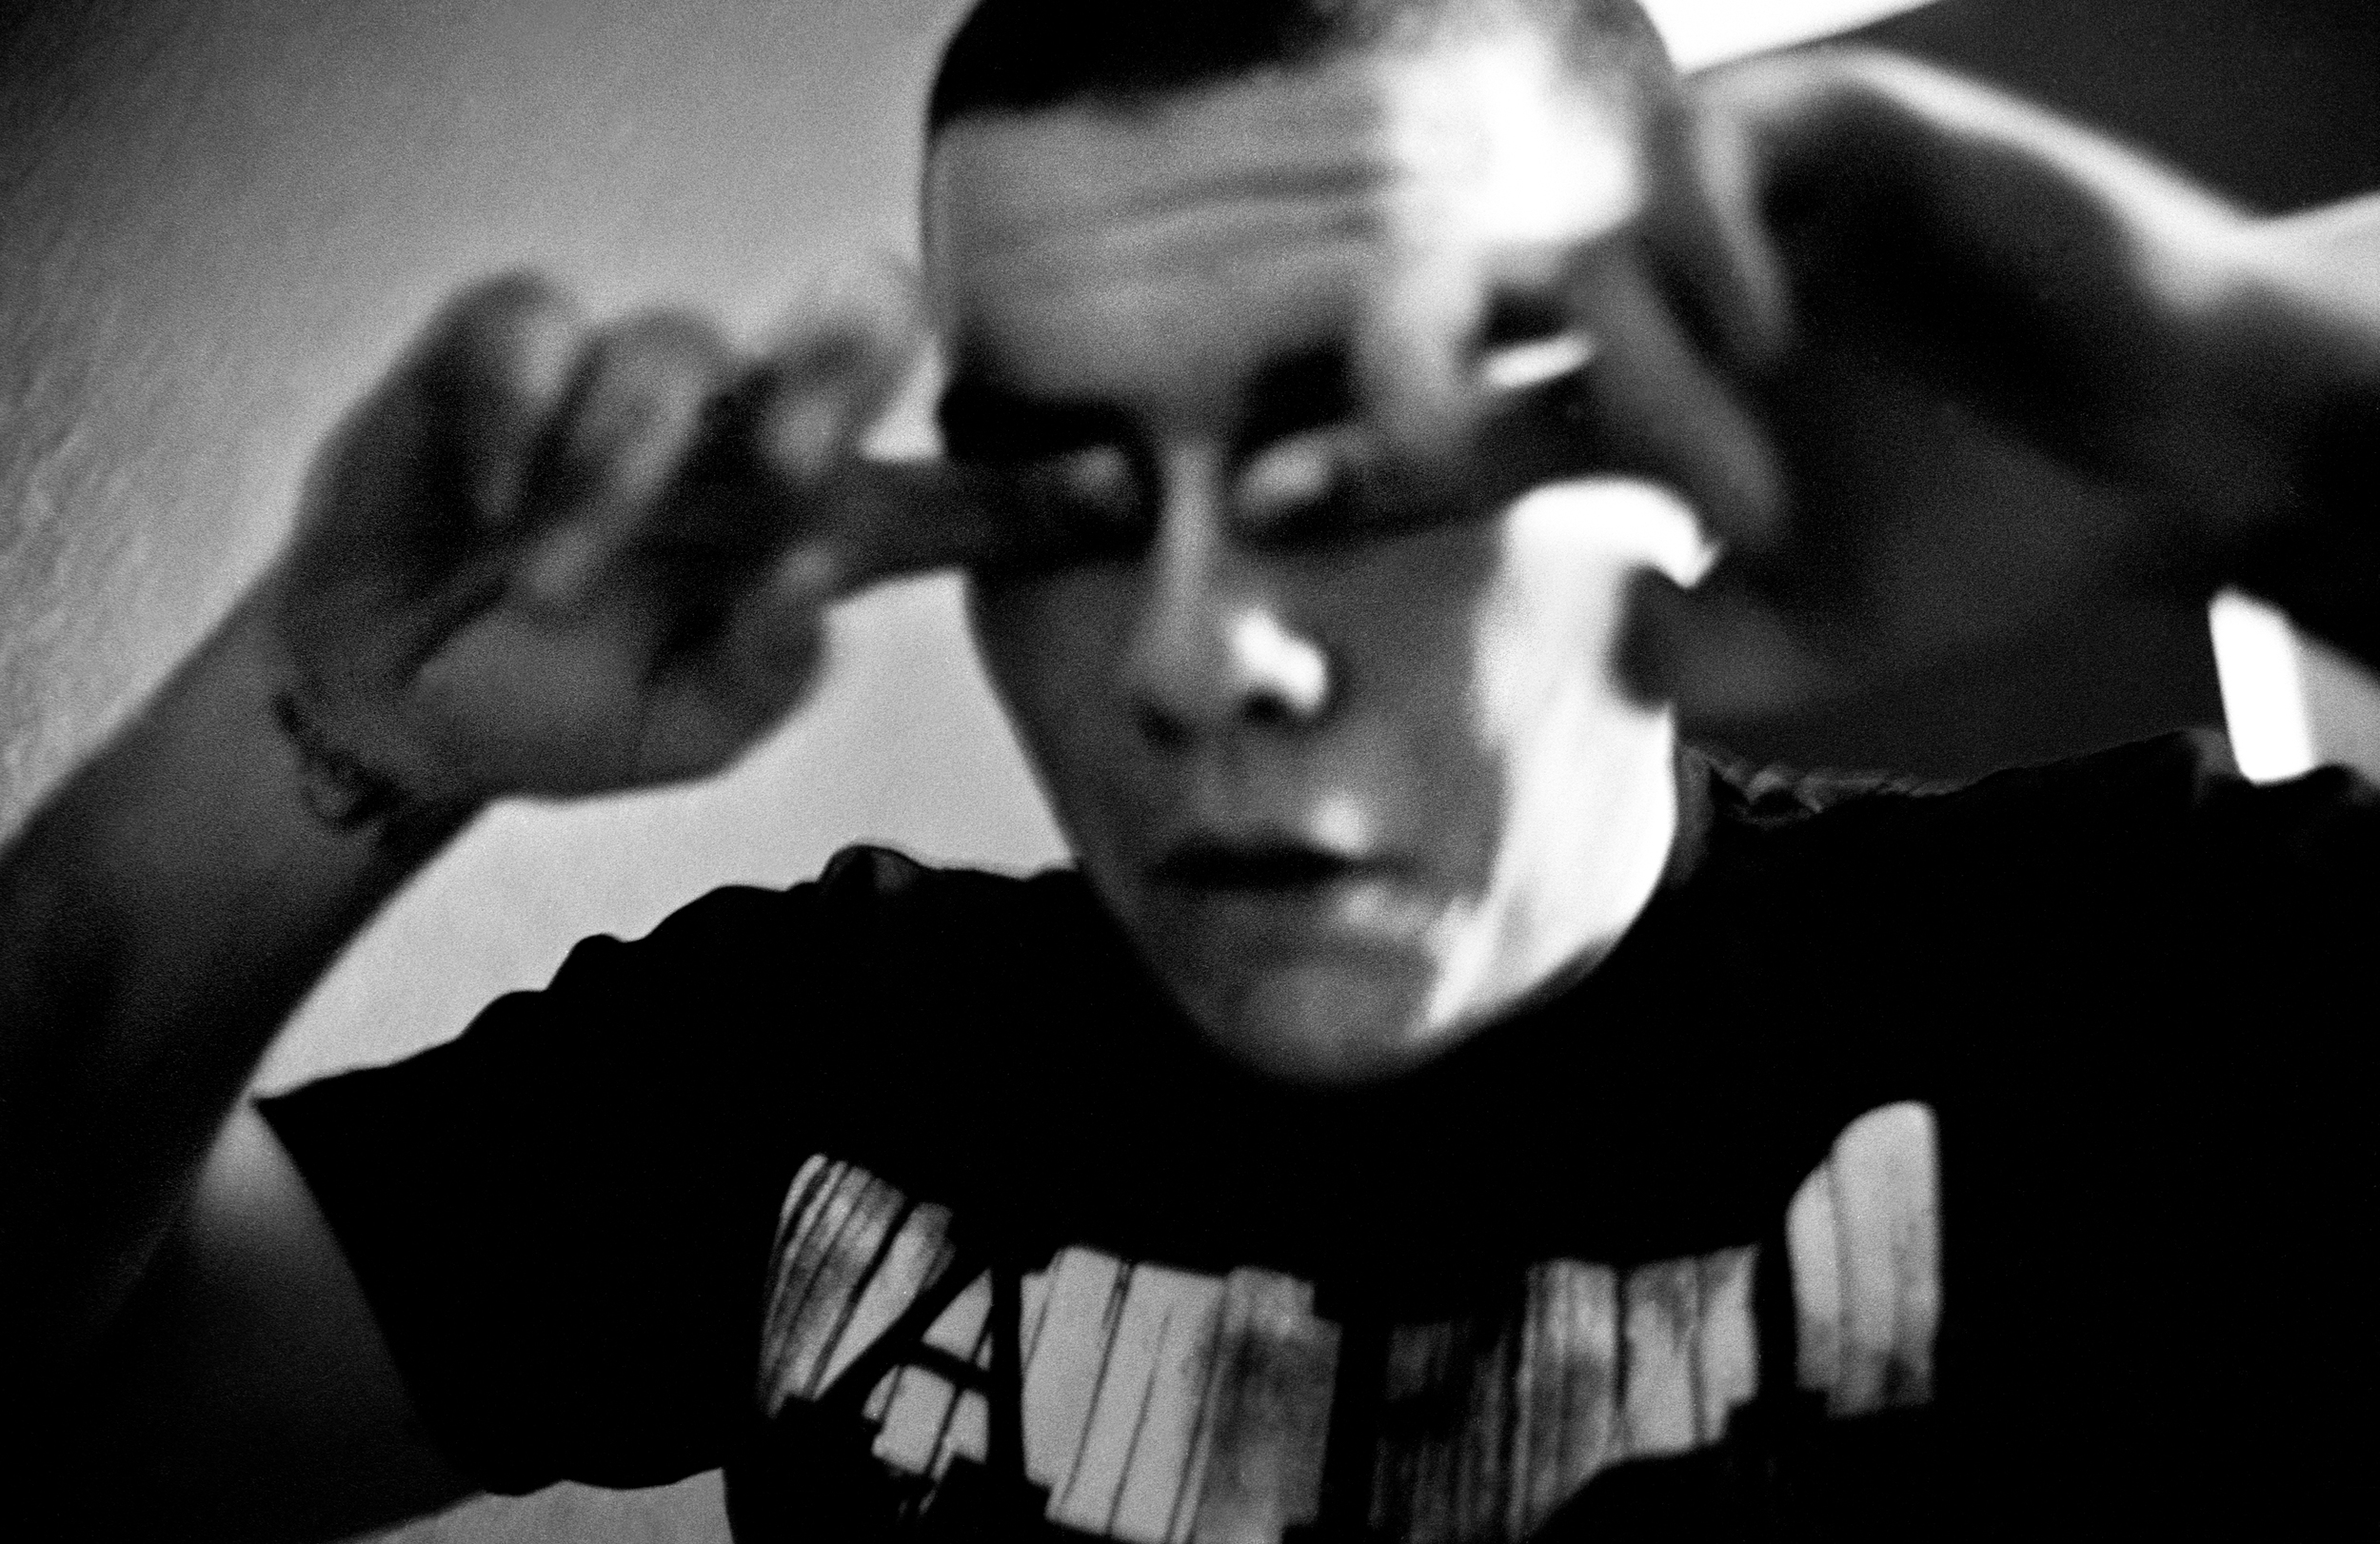  SPC Adam Ramsey rubs his eyes after having an anxiety attack at his sister's house in Carson City, Nevada, 2010. While on leave in Nevada Ramsey experienced hallucinations, depression, and suicidal thoughts; he self-medicated by mixing prescribed me